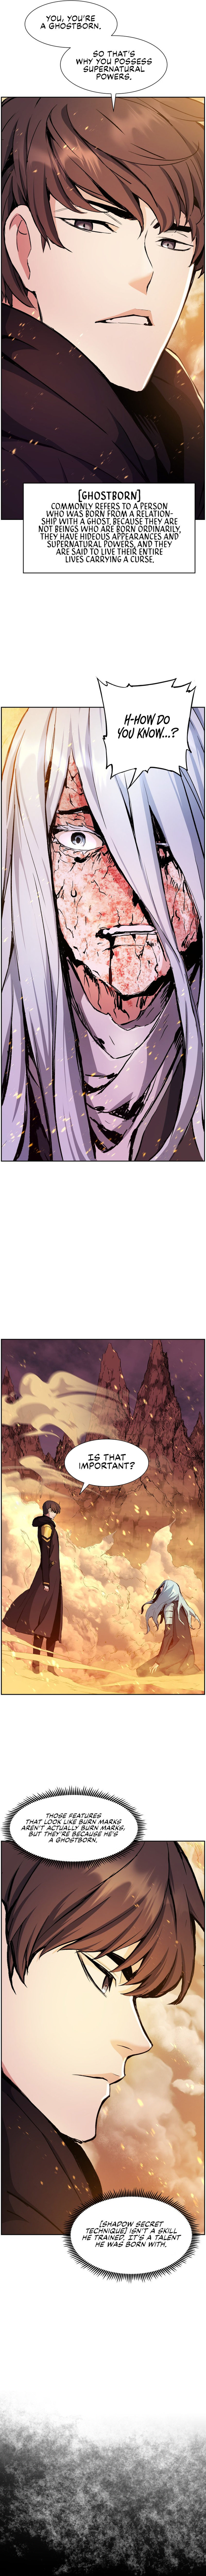 Return Of The Shattered Constellation - Chapter 36 Page 8